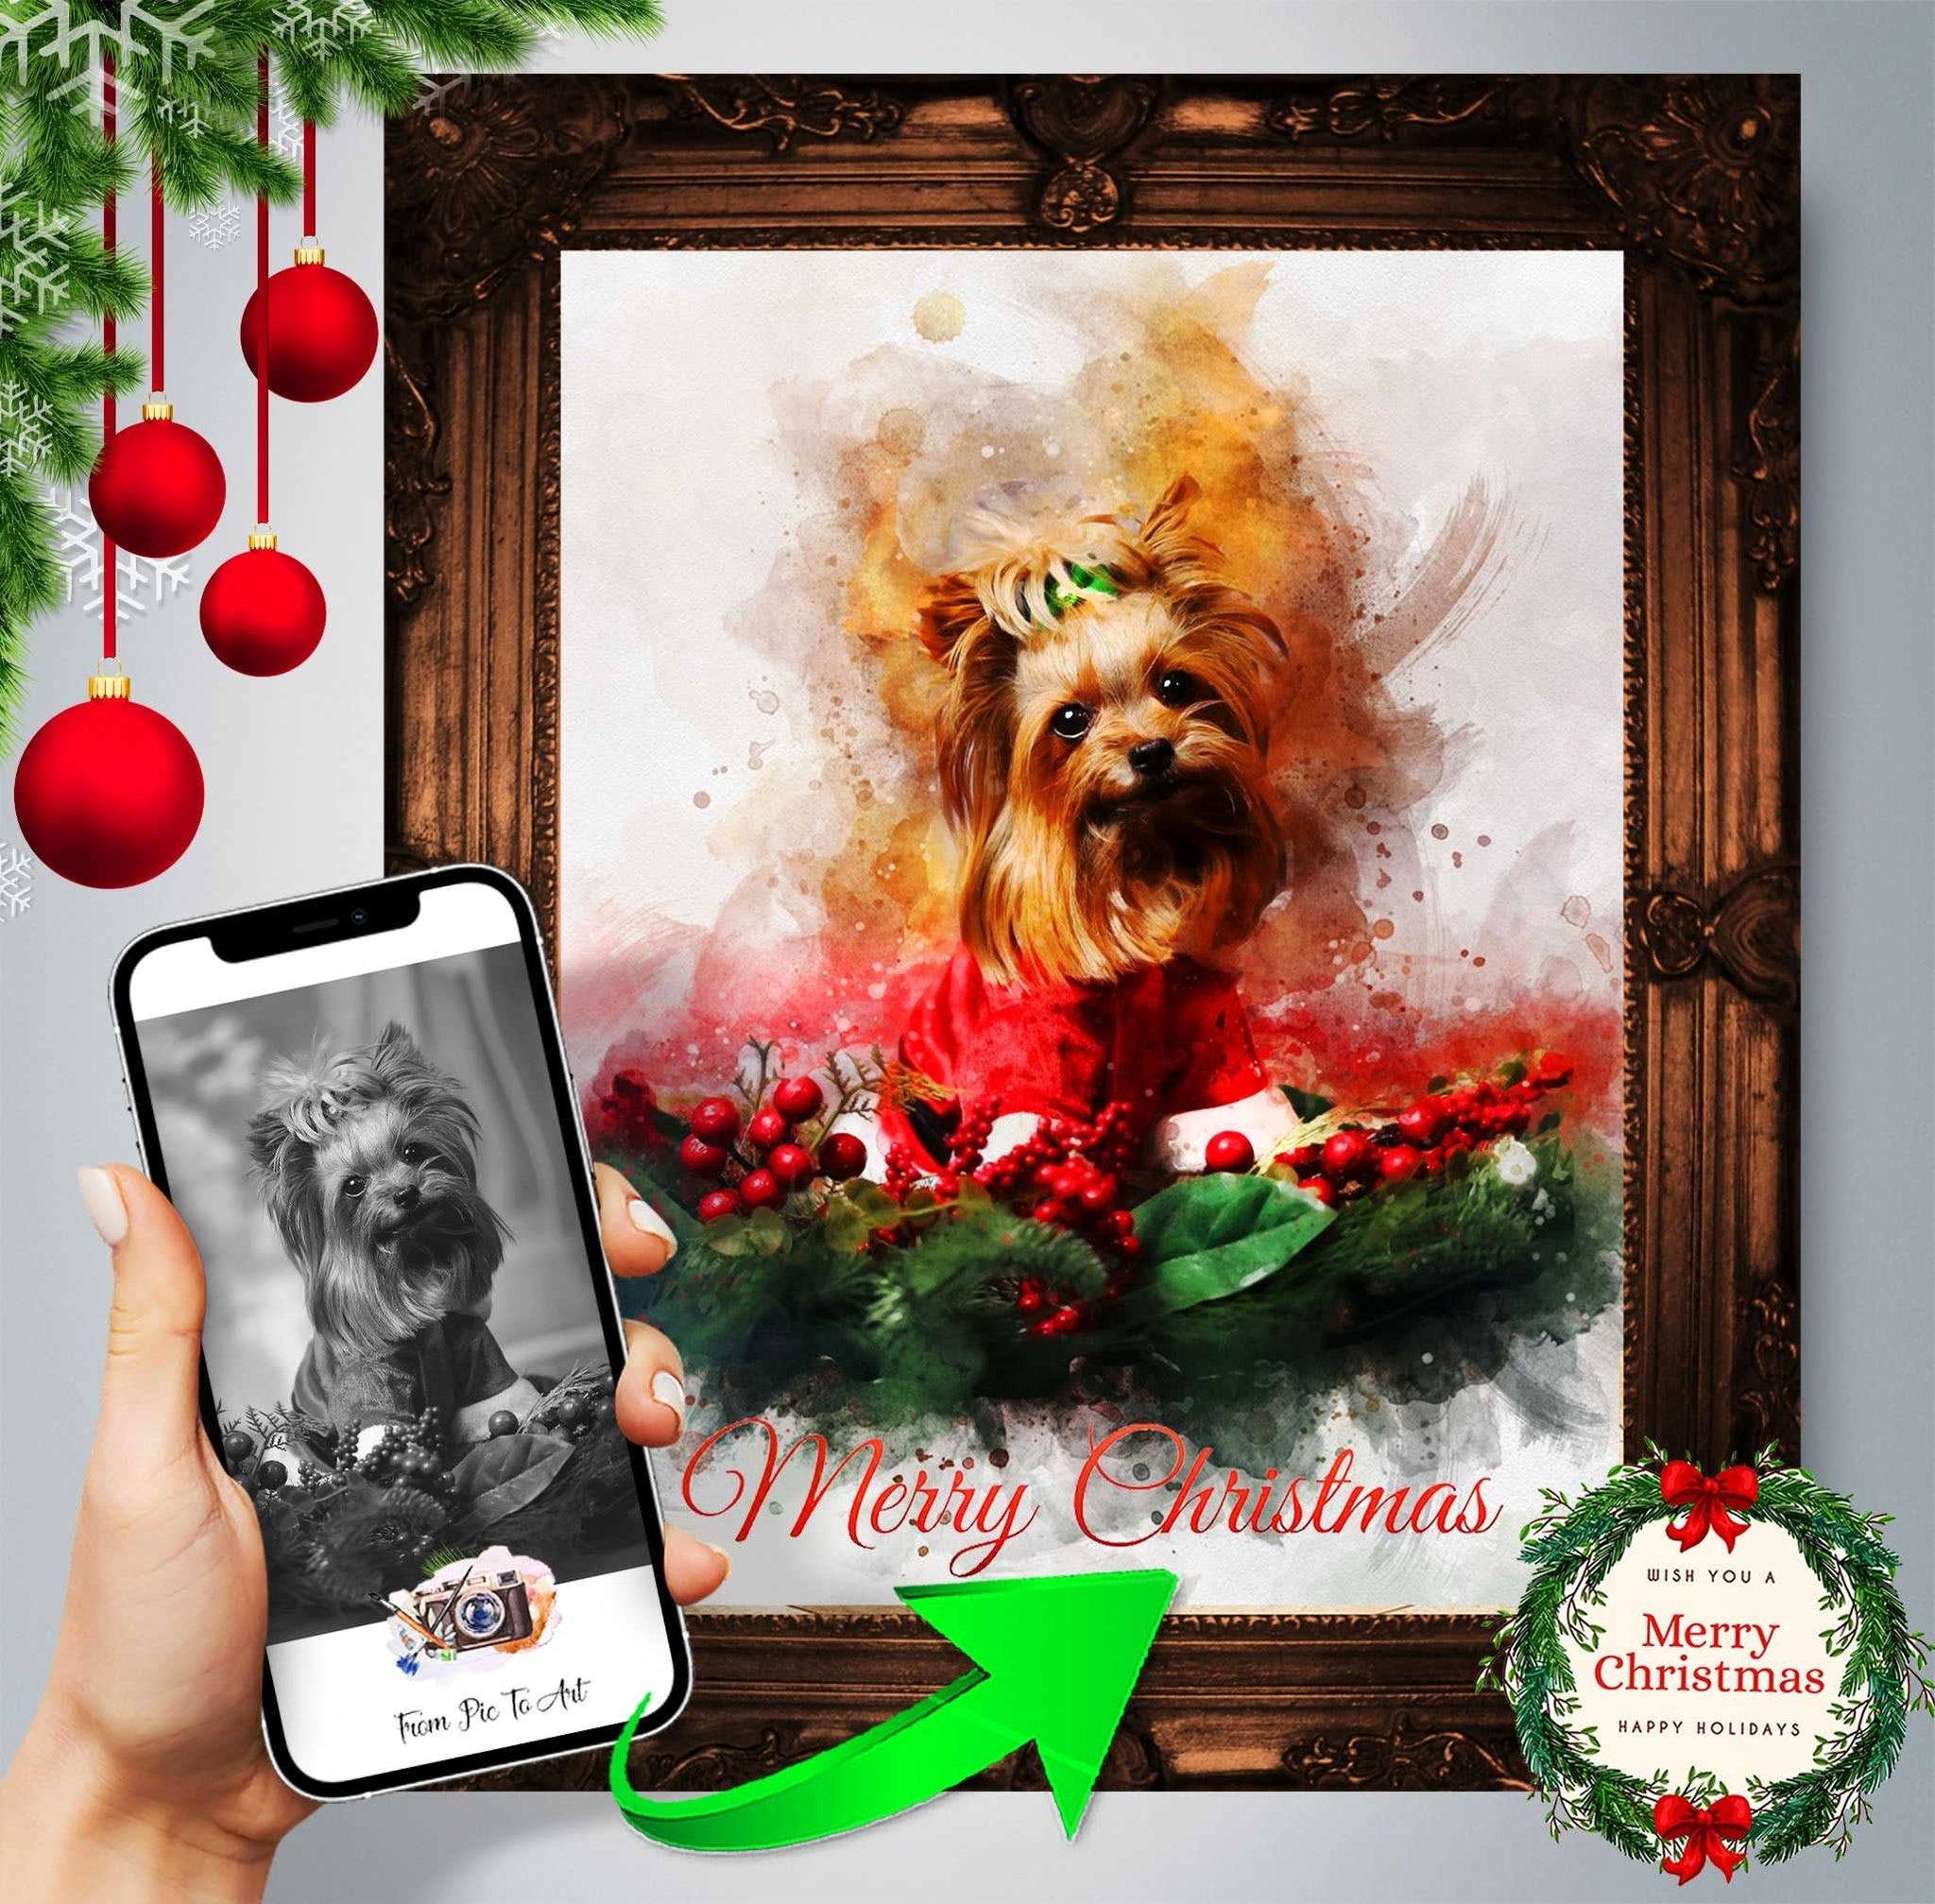 Secret Santa Gifts | Christmas Gift Suggestions | Gifts to Give for Secret Santa - FromPicToArt